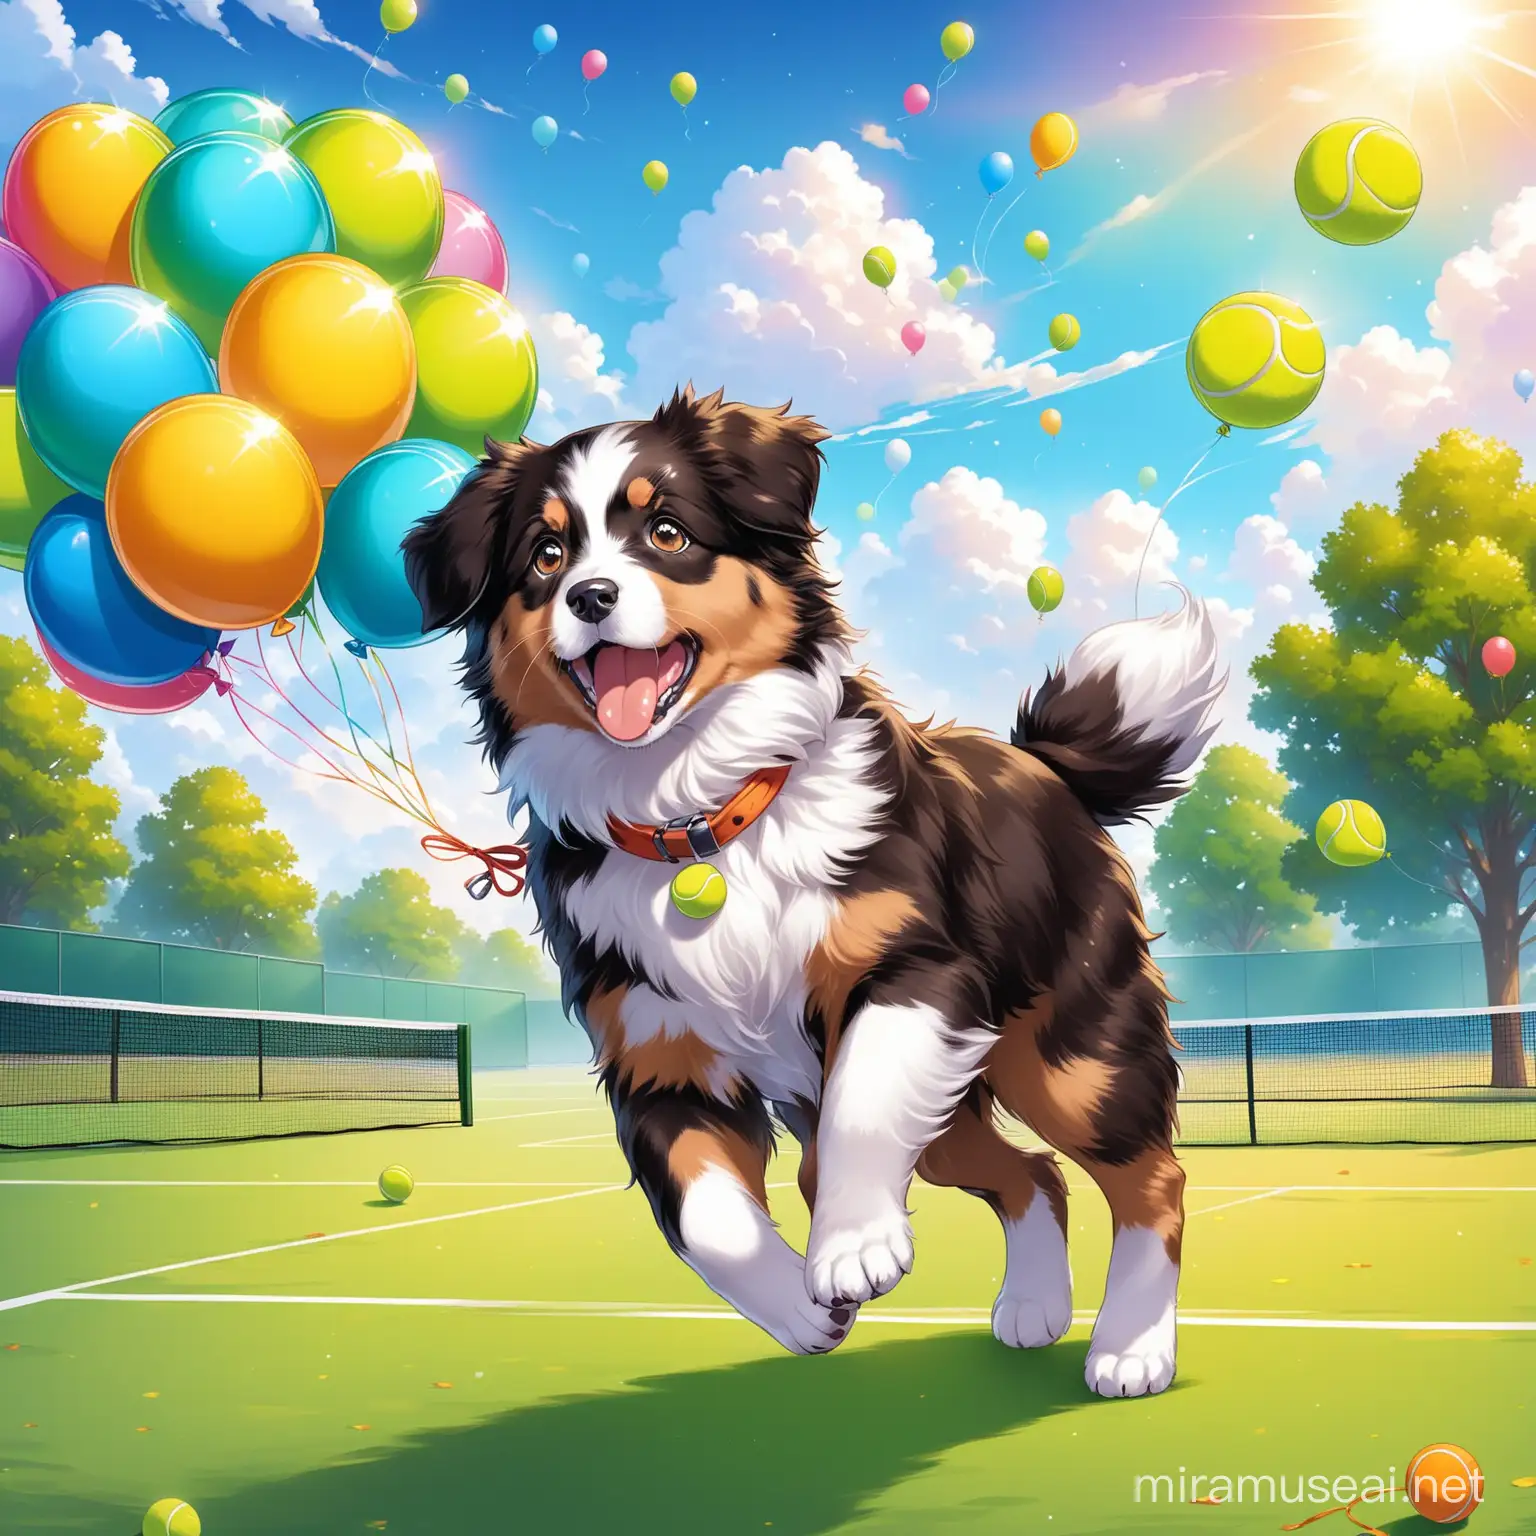 Energetic Australian Shepherd Puppy Playing with Tennis Ball in Park under Cloudy Sky with Balloons